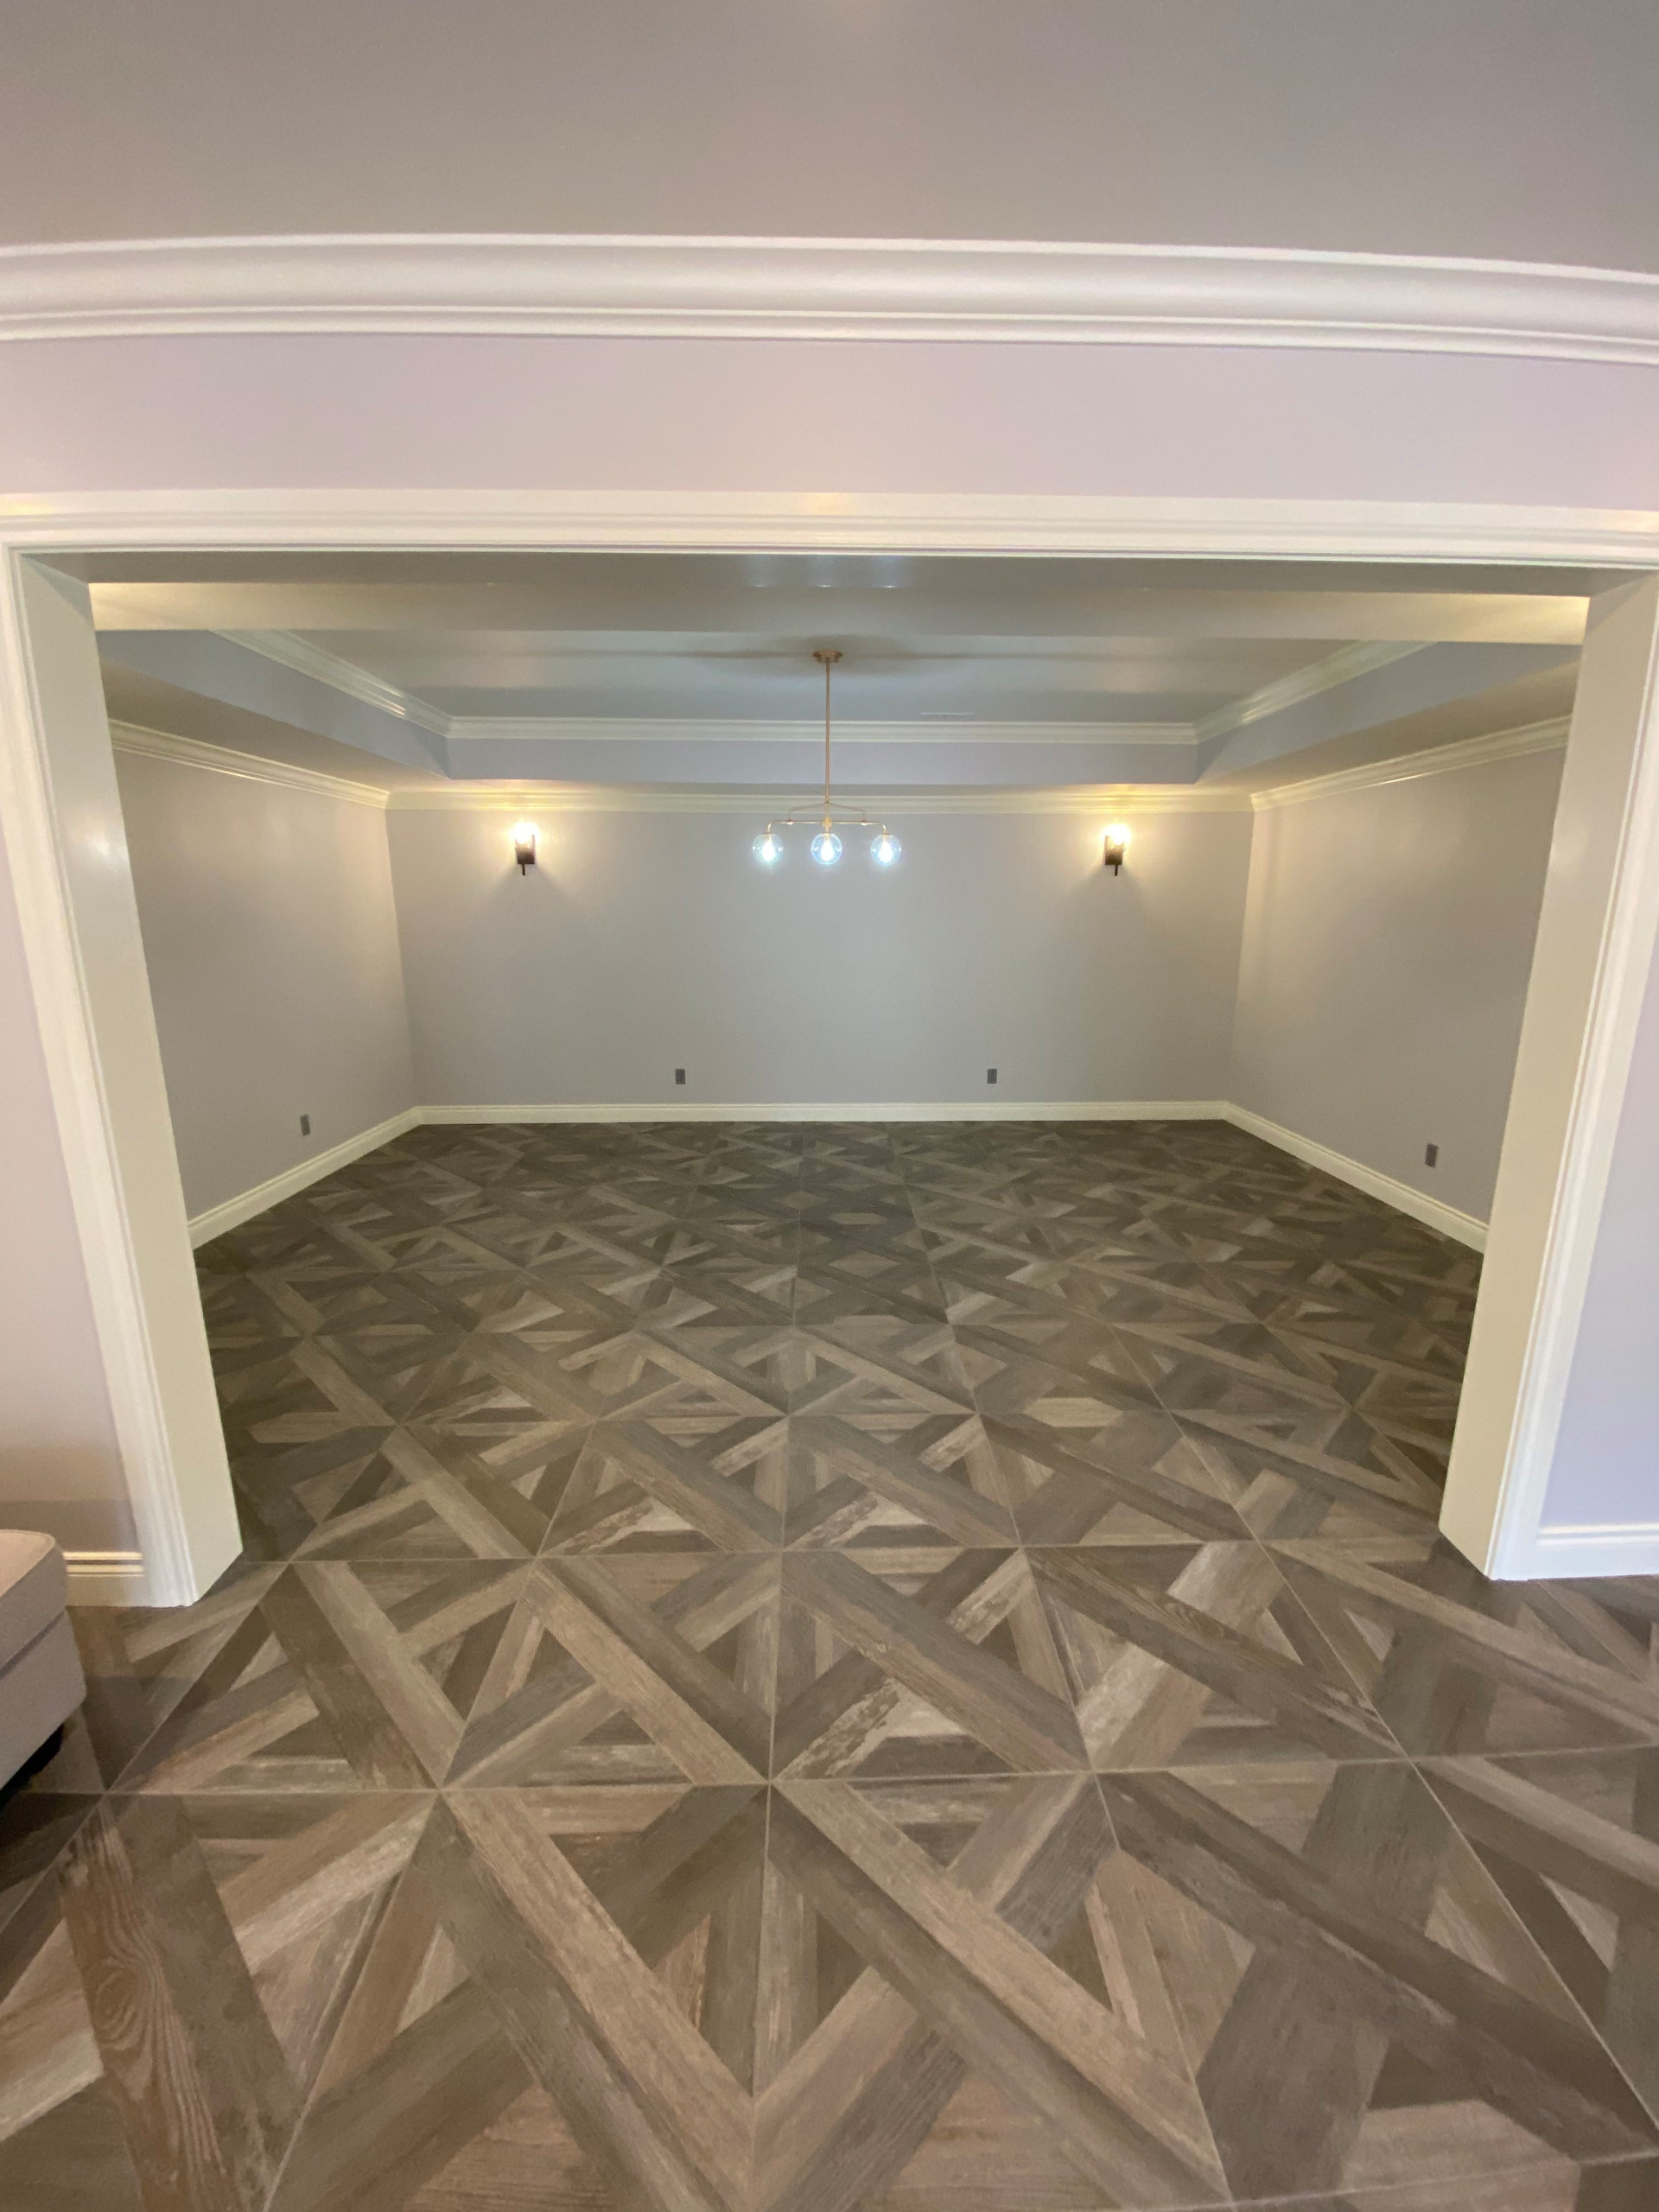 Theater room with tile floor